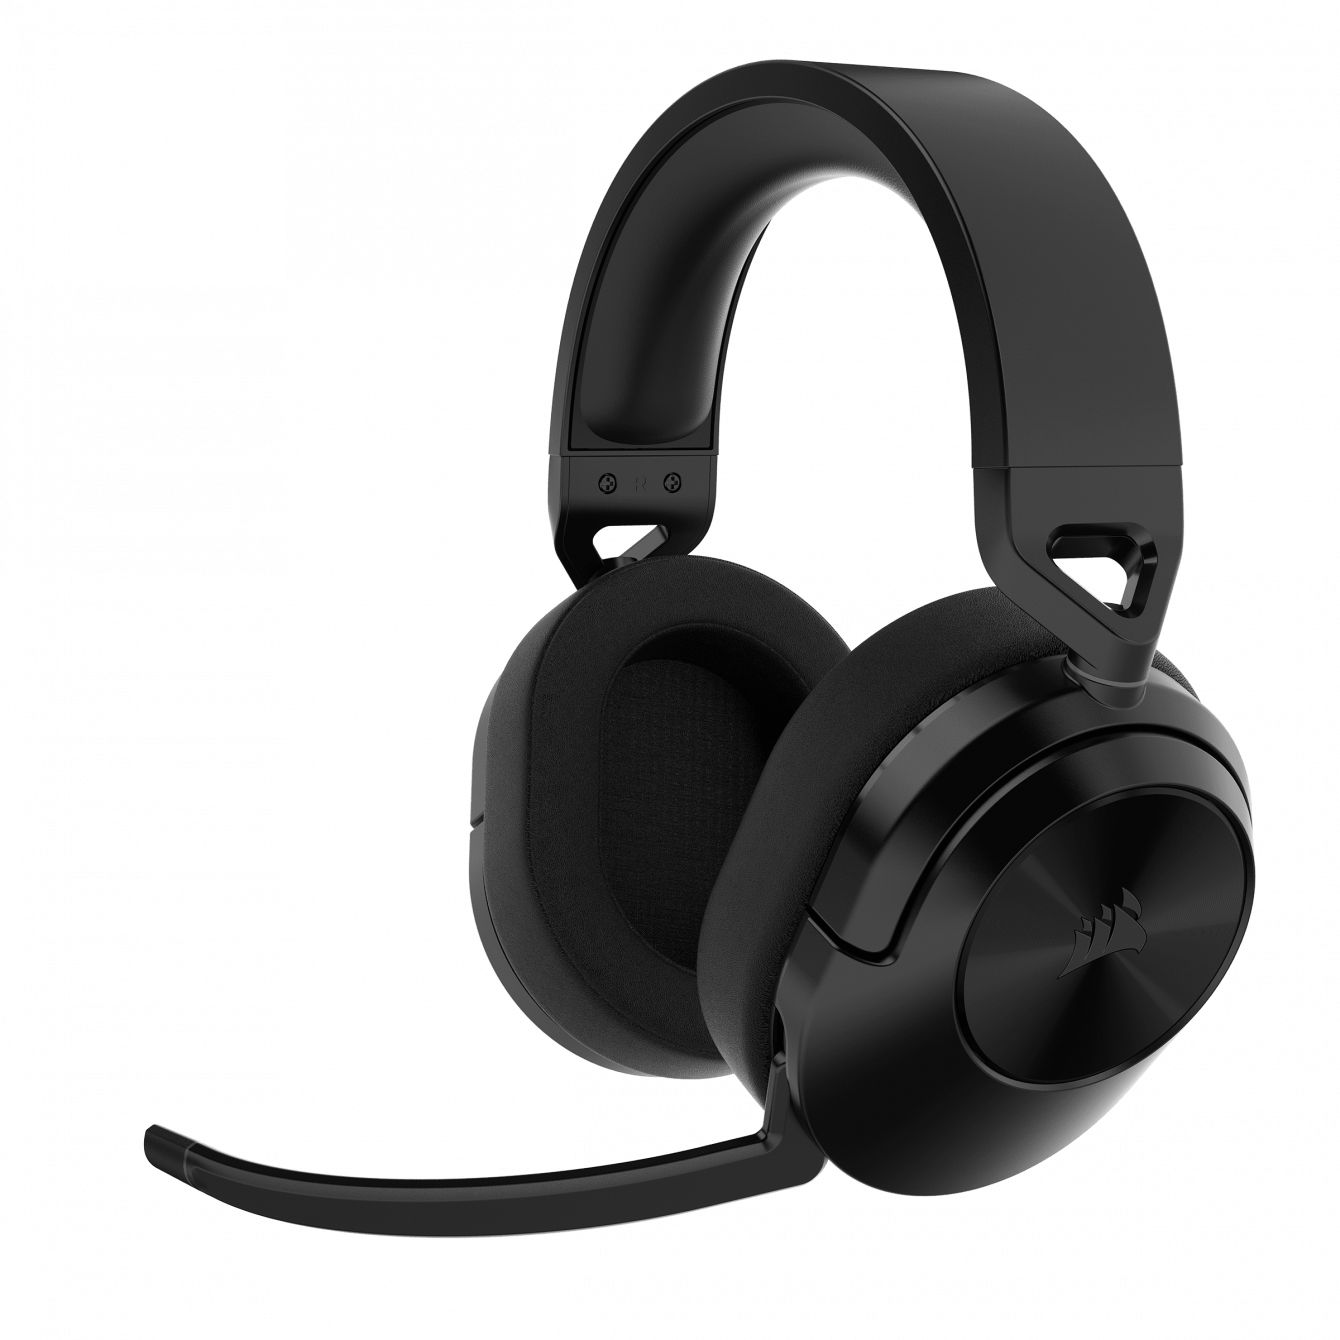 CORSAIR HS65 and HS55: two new models of gaming headsets